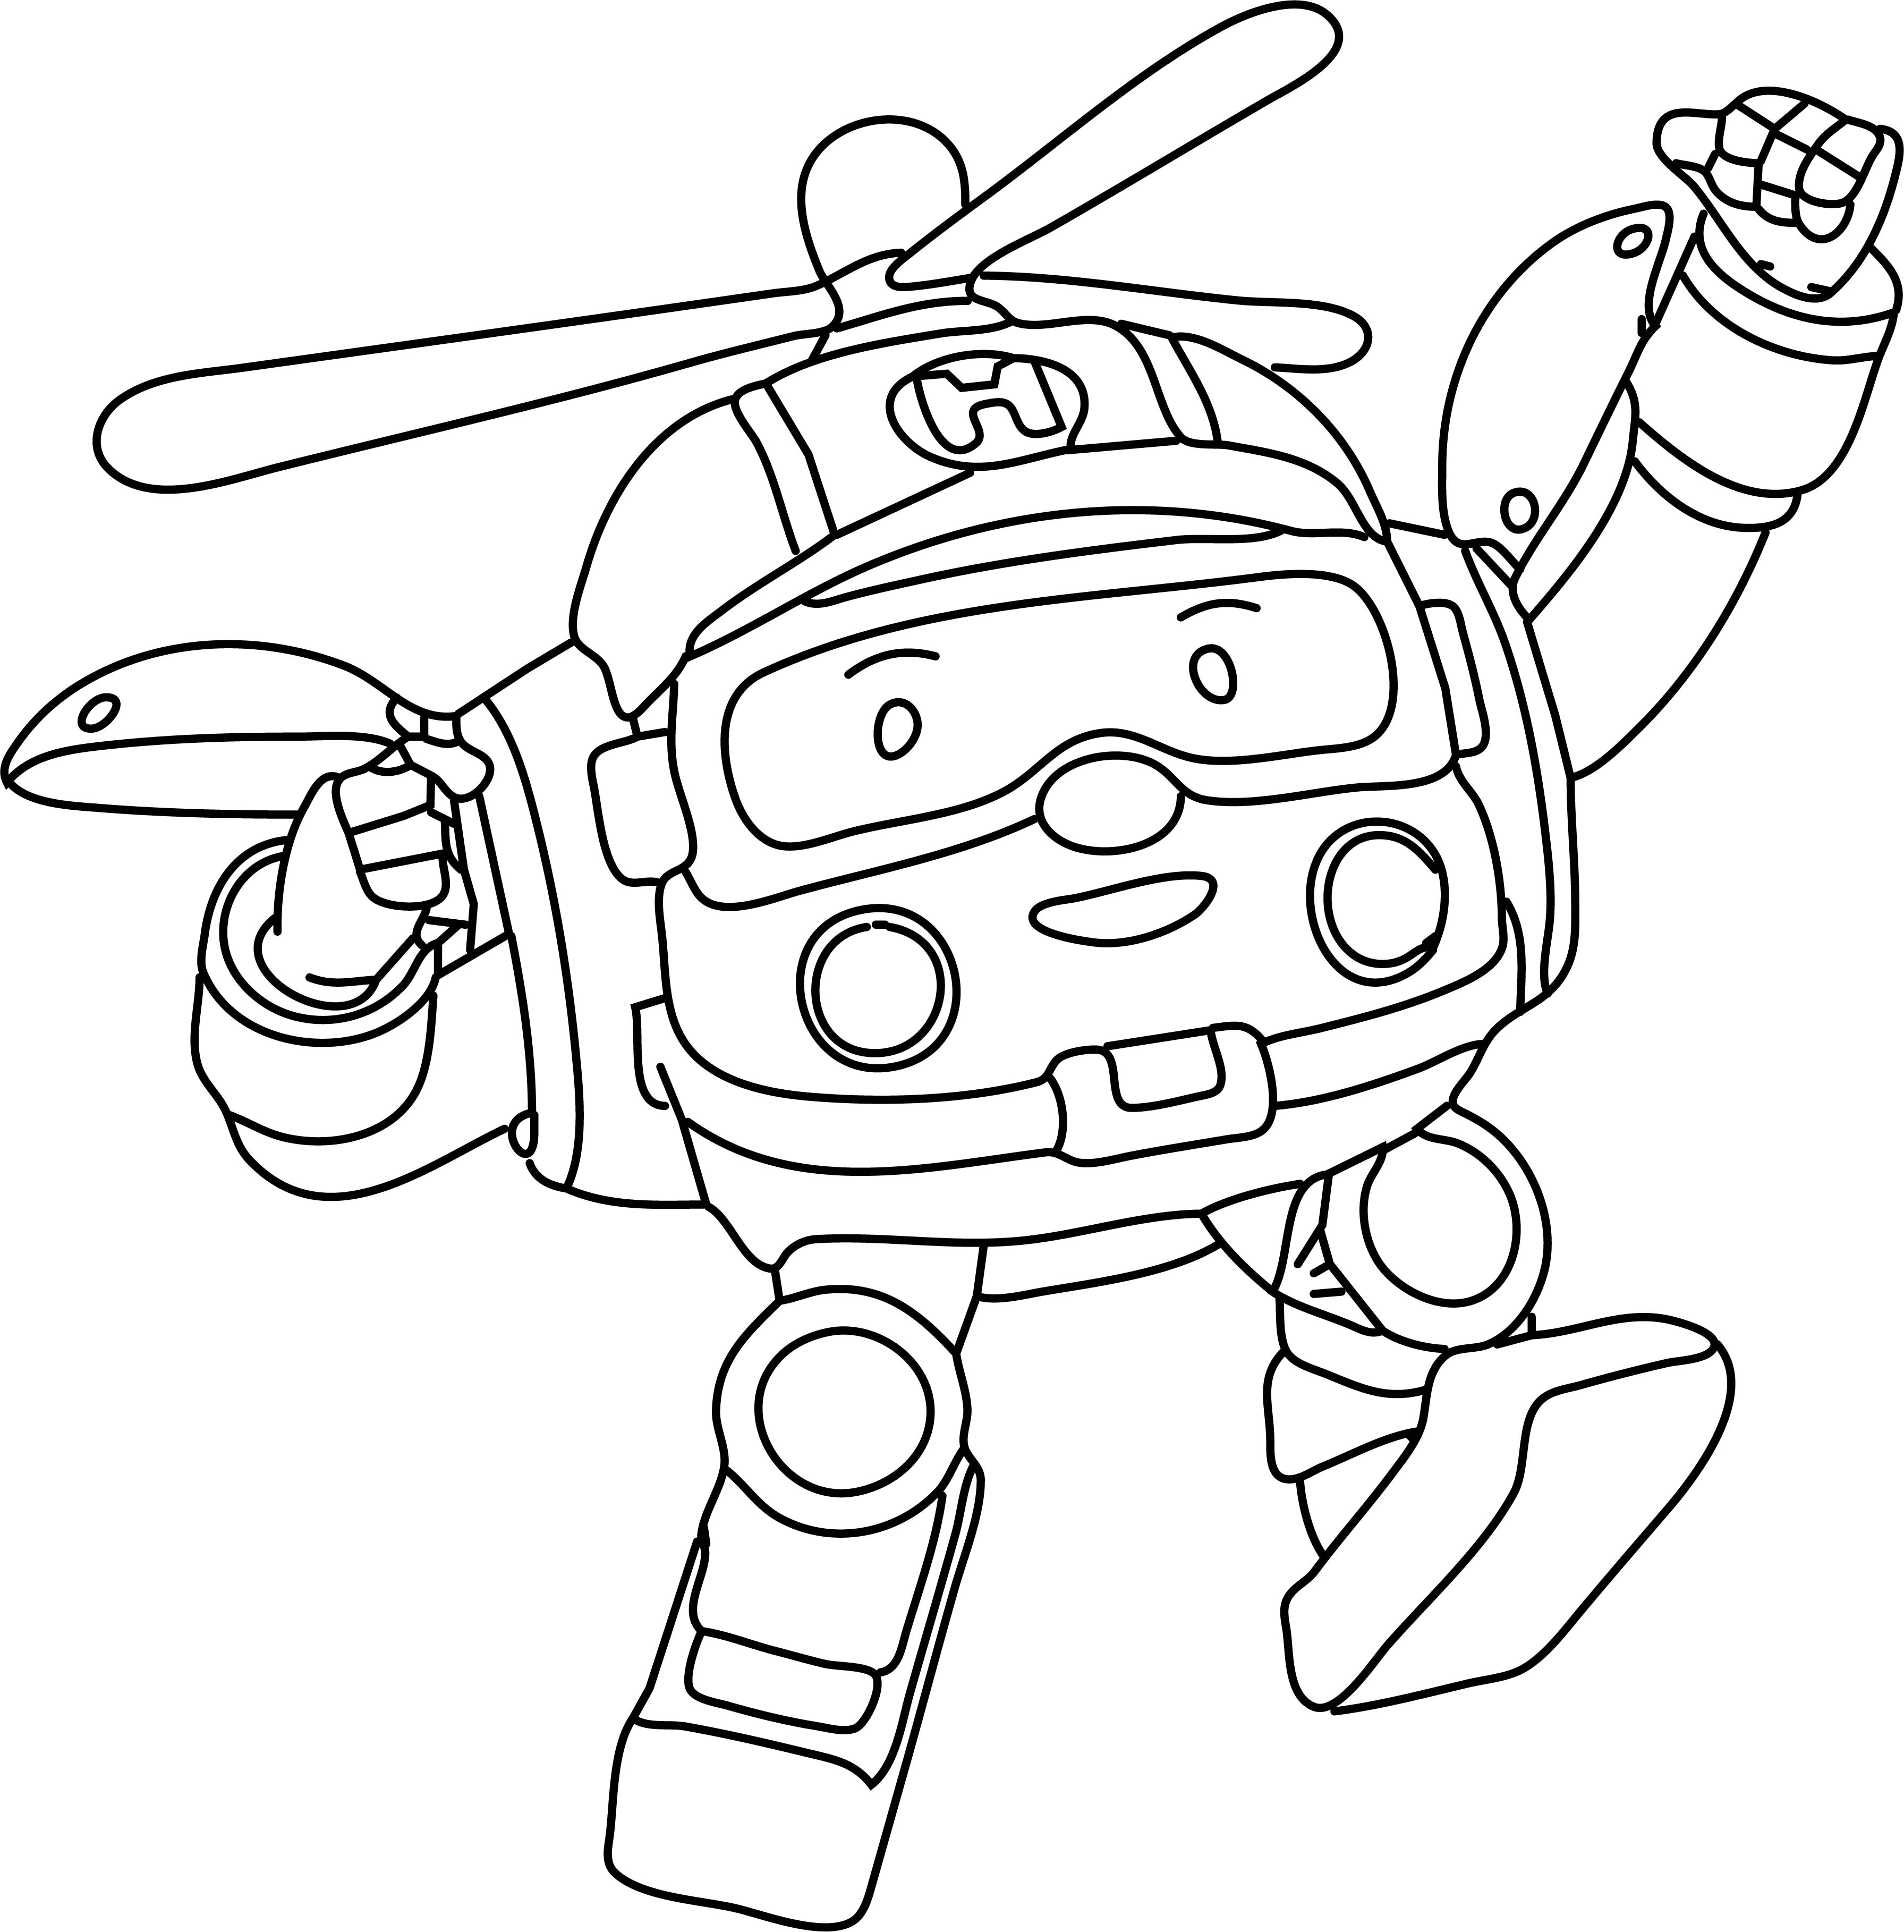 Robocar Poli Coloring Pages   Coloring Home